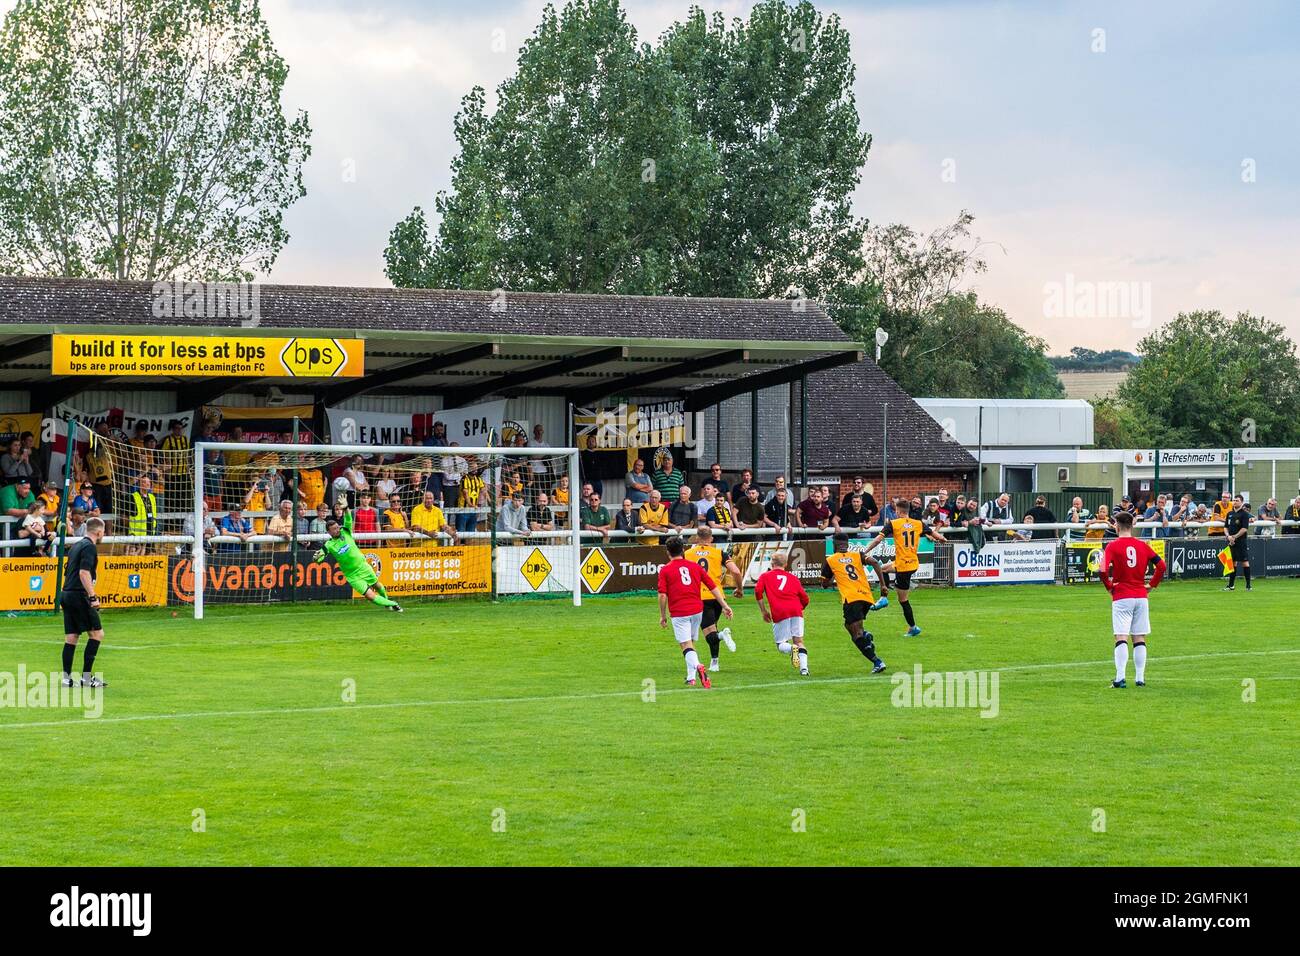 Leamington, Warwickshire, UK. 18th Sep, 2021. Leamington FC played Stone Old Alleynians in the FA Cup 2nd qualfying round at Harbury Lane today. Leamington FC won 3-1 and progress into the next round of the competition. Dan Turner converts a penalty in the 83rd minute to give Leamington a 3-1 lead. Credit: AG News/Alamy Live News Stock Photo